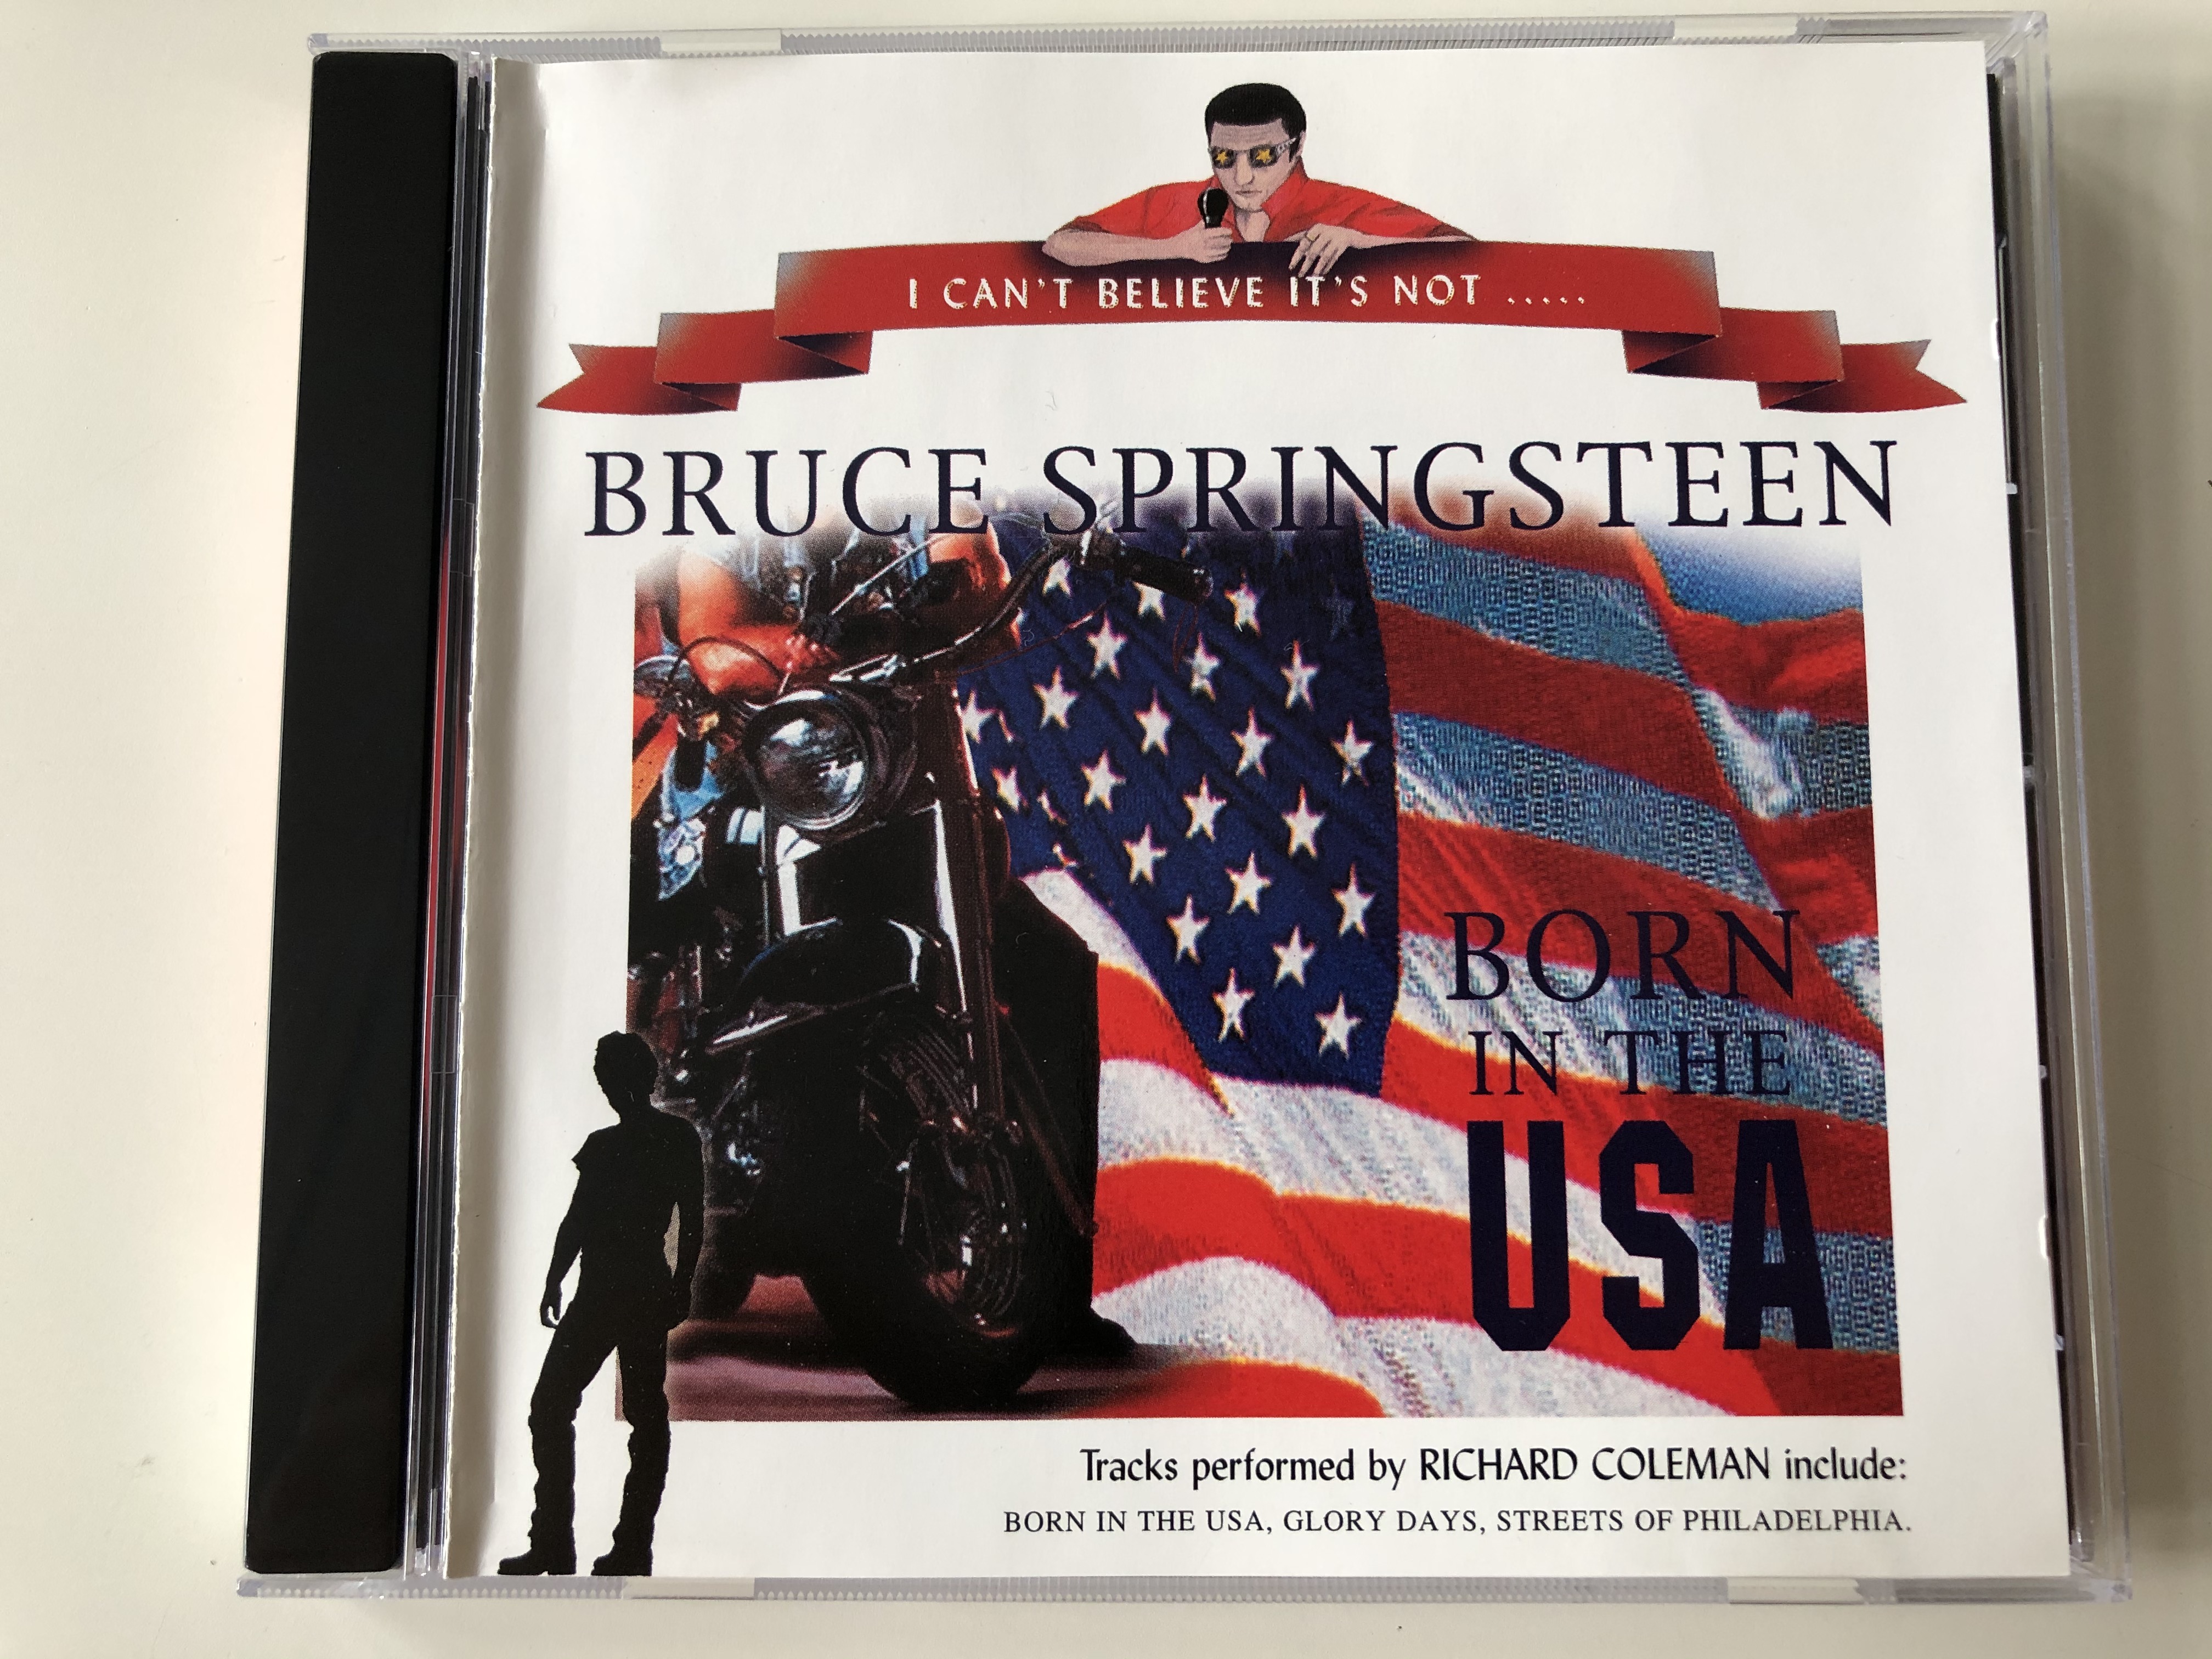 bruce-springsteen-i-can-t-believe-it-s-not...-born-in-the-usa-tracks-performed-by-richard-coleman-include-born-in-the-usa-glory-days-streets-of-philadelphia-pegasus-audio-cd-2001-icbinc-1-.jpg